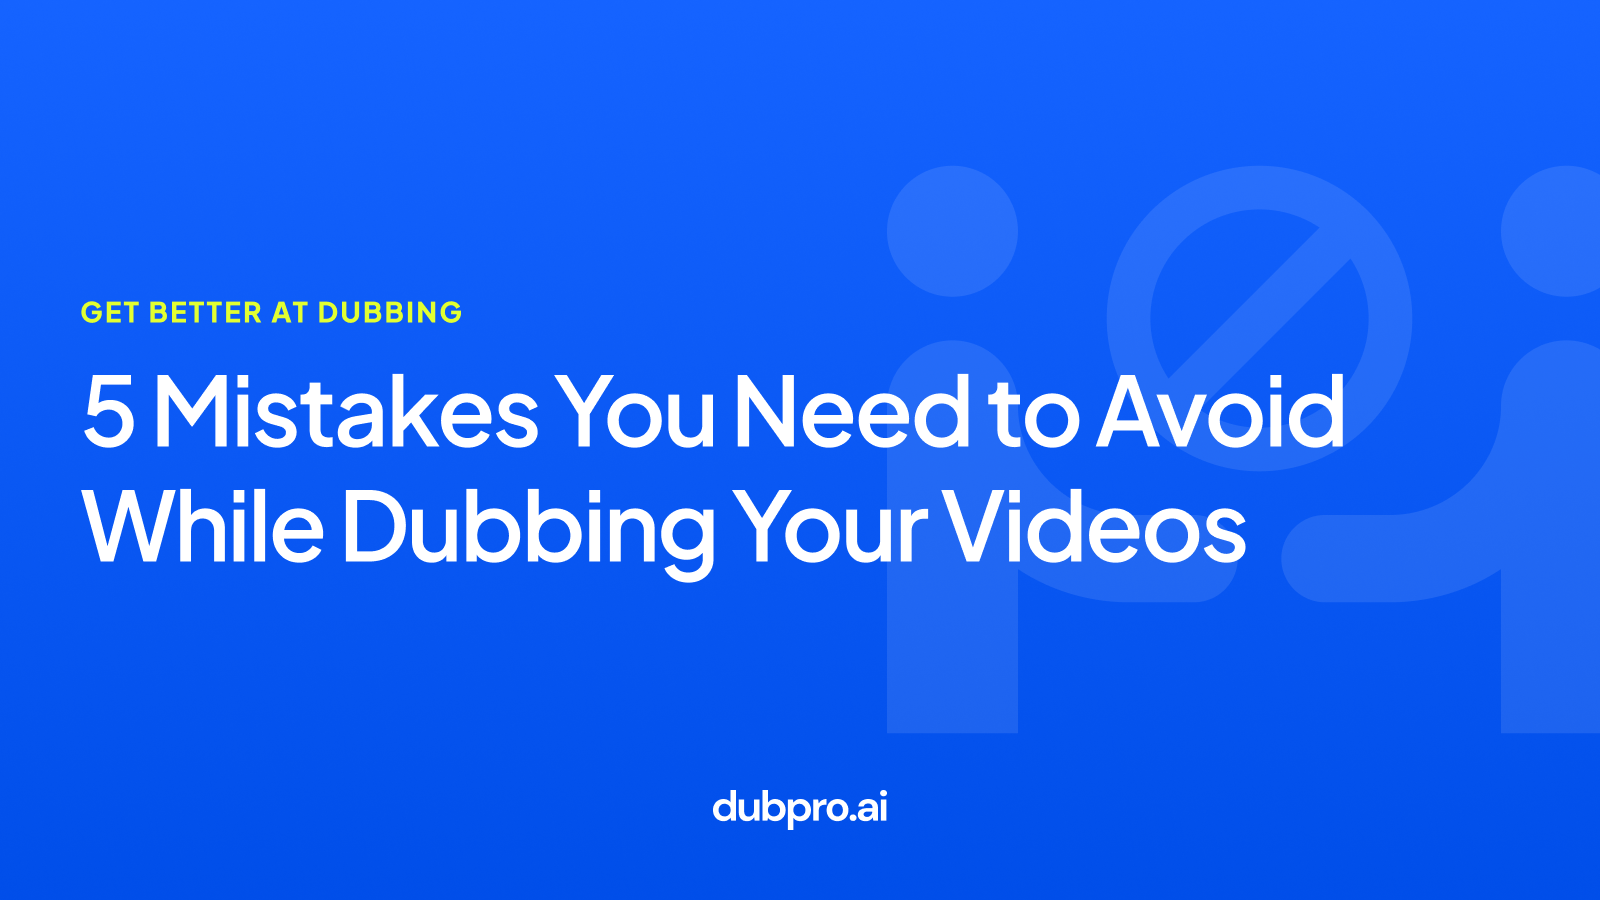 5 mistakes You Need to Avoid While Dubbing Your Videos